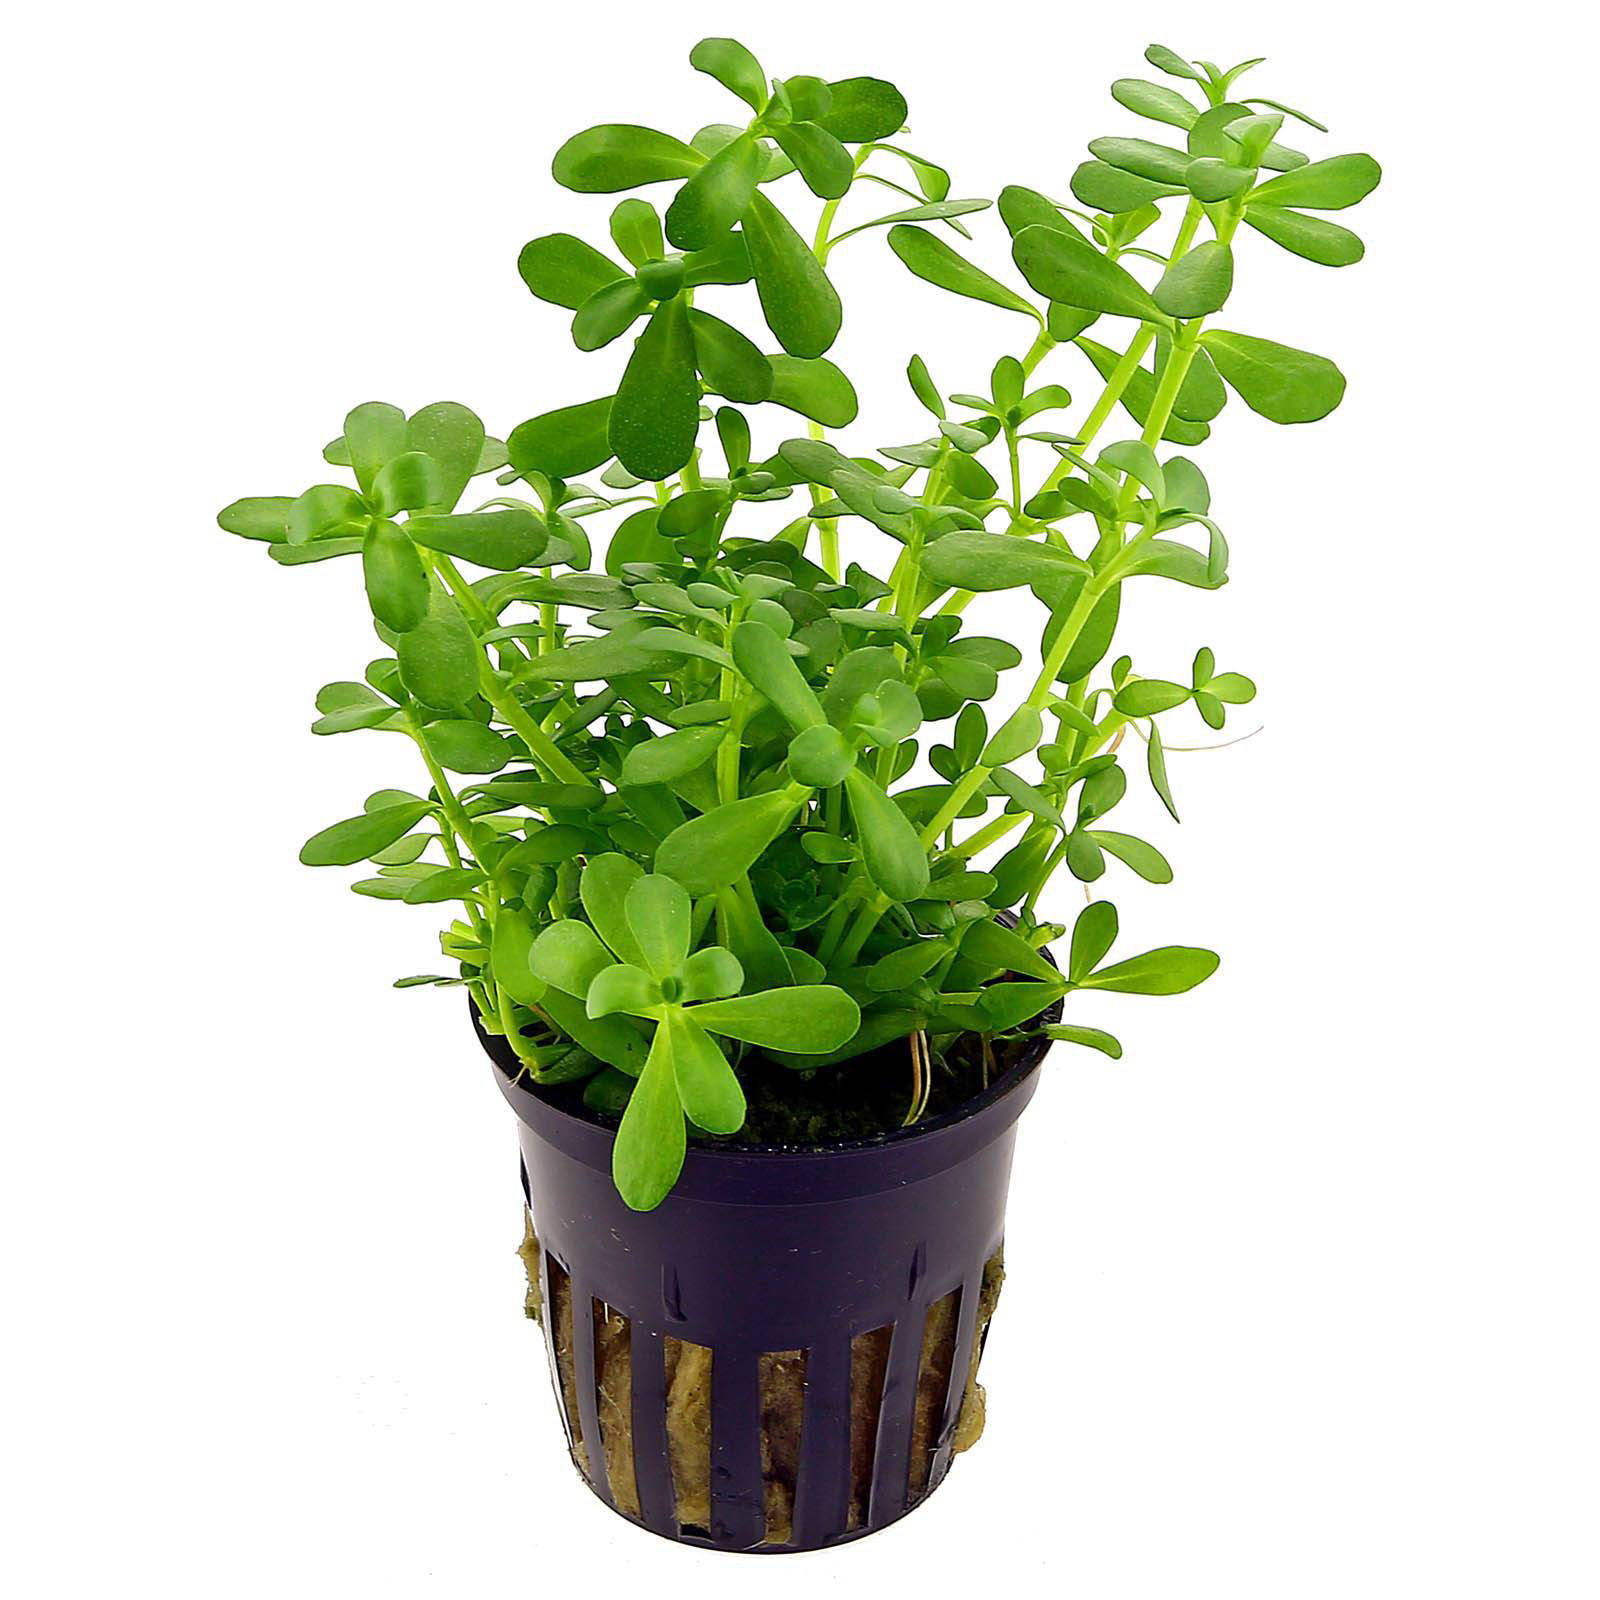 Bacopa-plant-on-the-pot